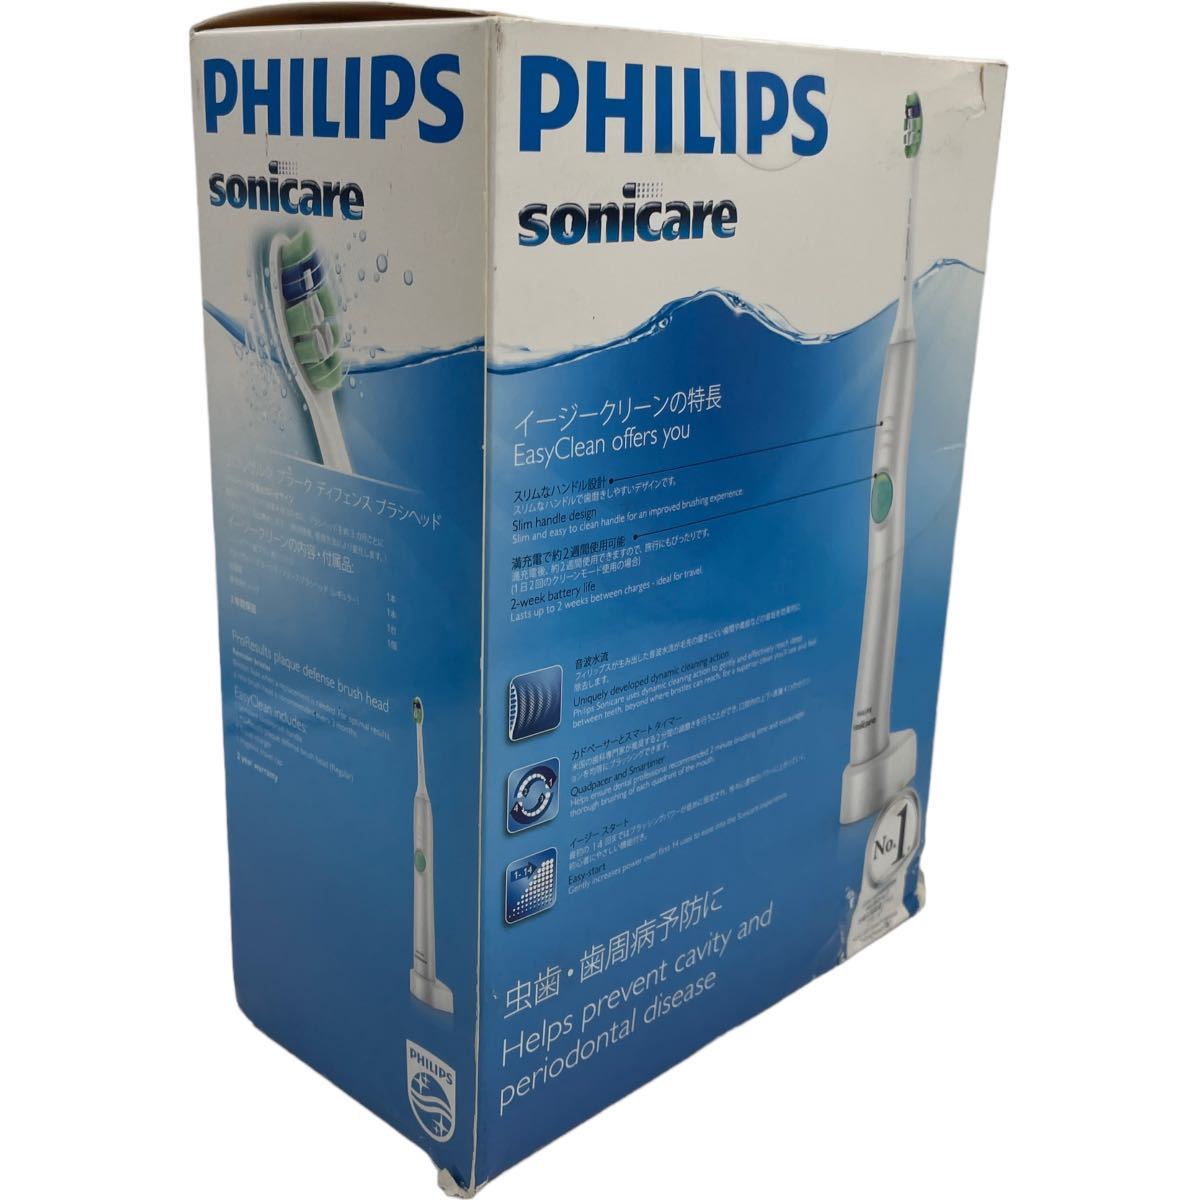  new goods with translation Philips Sonicare Easy clean electric toothbrush HX6551/01